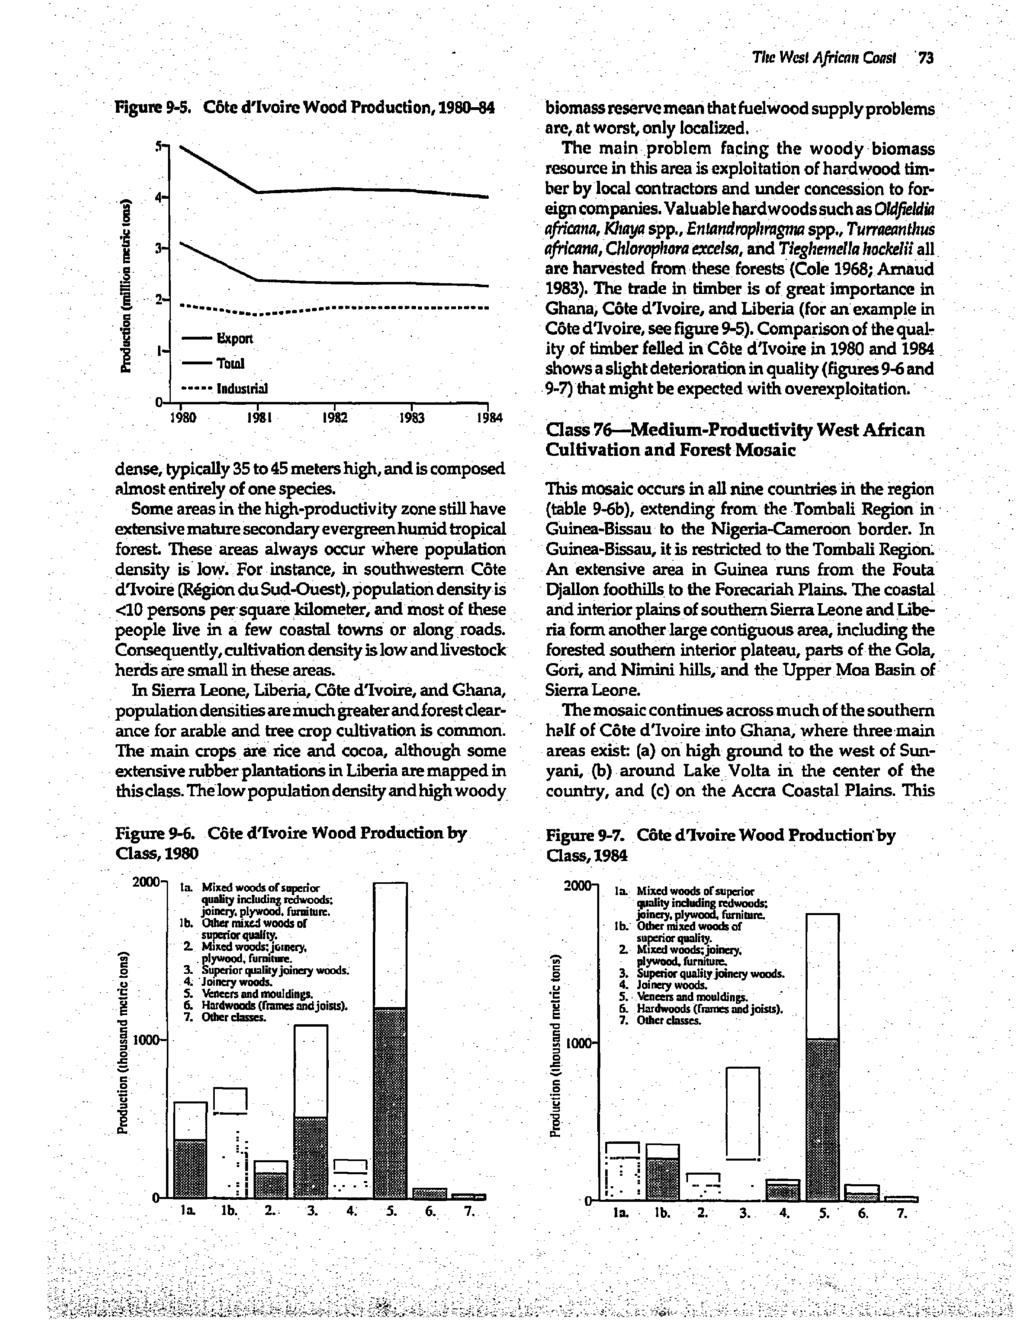 Tire WesI African CoasI 73 Figure9-5. Cbted'lvoireWoodProduction,1980-84 biomass reserve mean that fuelwood supply problems are, at worst, only localized.